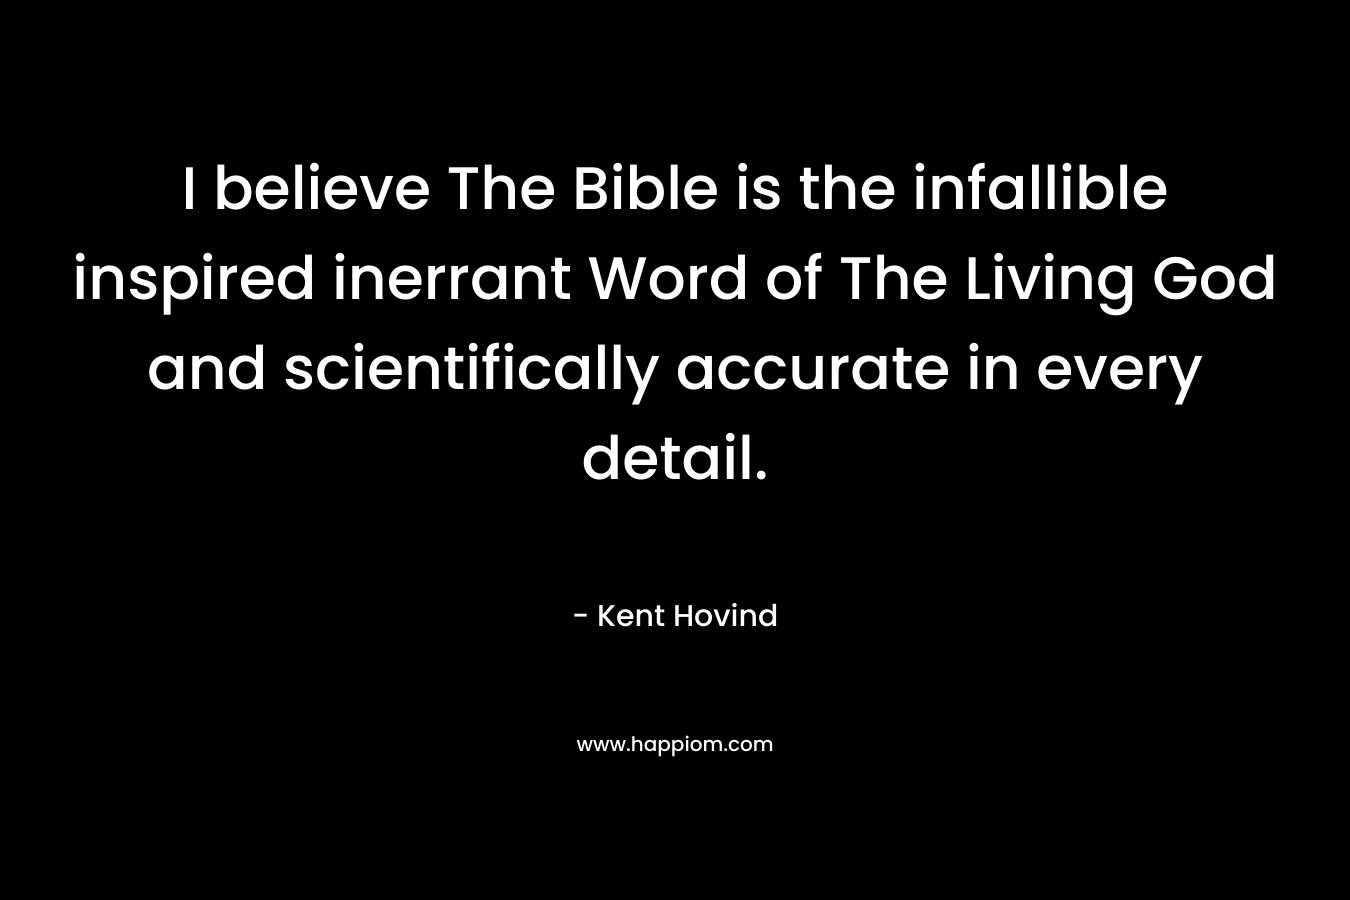 I believe The Bible is the infallible inspired inerrant Word of The Living God and scientifically accurate in every detail. – Kent Hovind